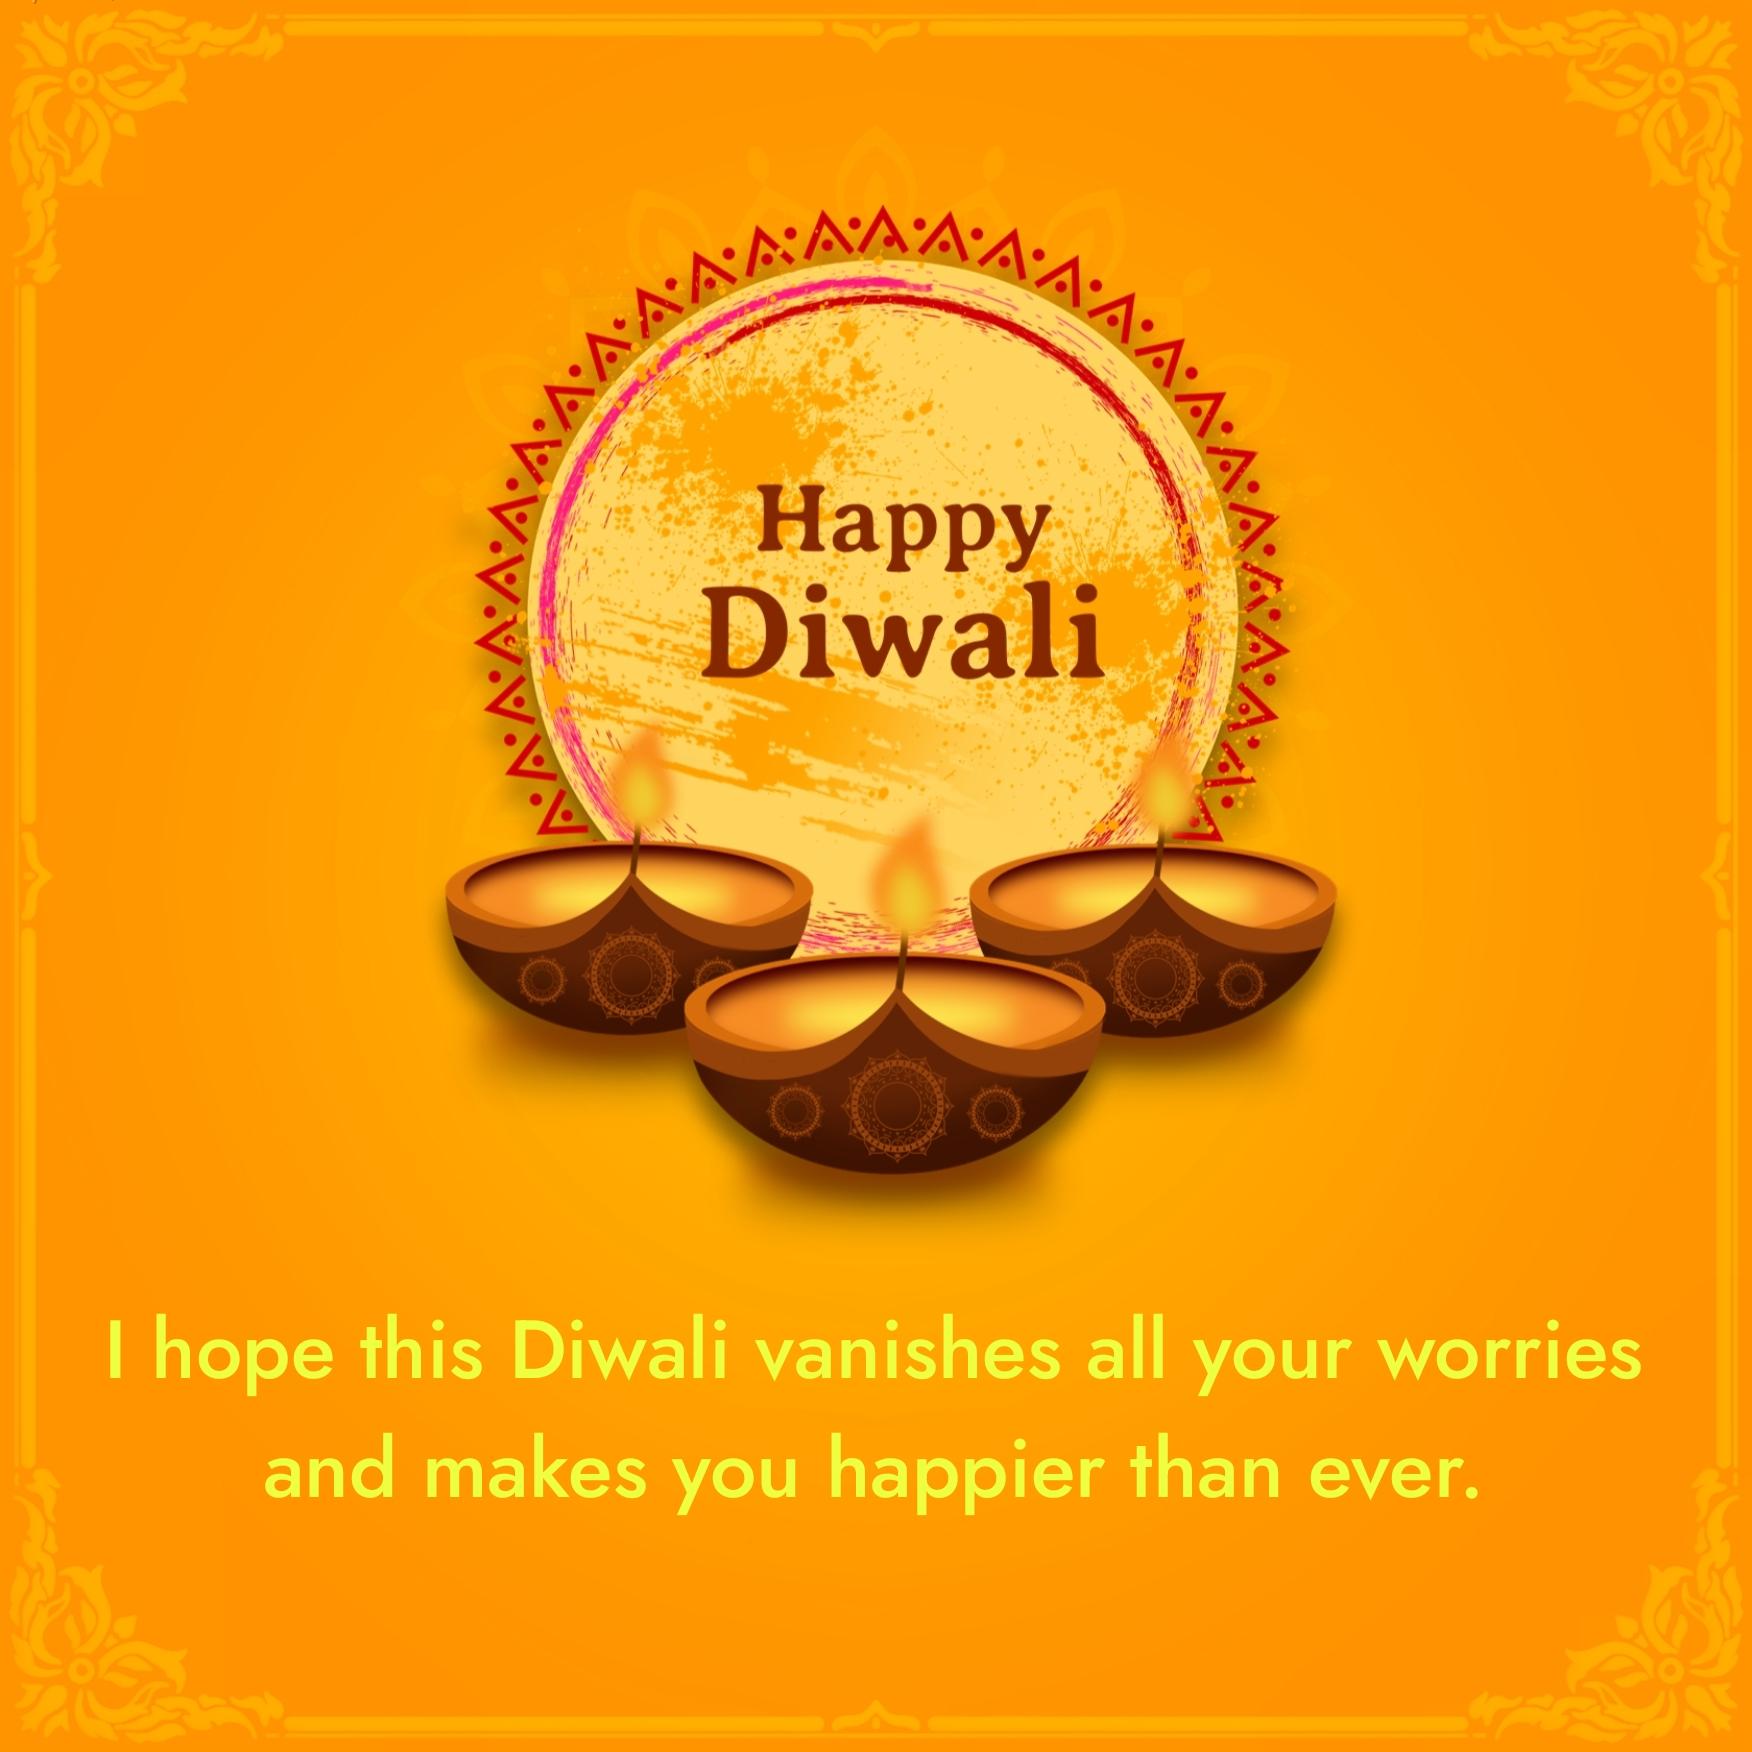 I hope this Diwali vanishes all your worries and makes you happier